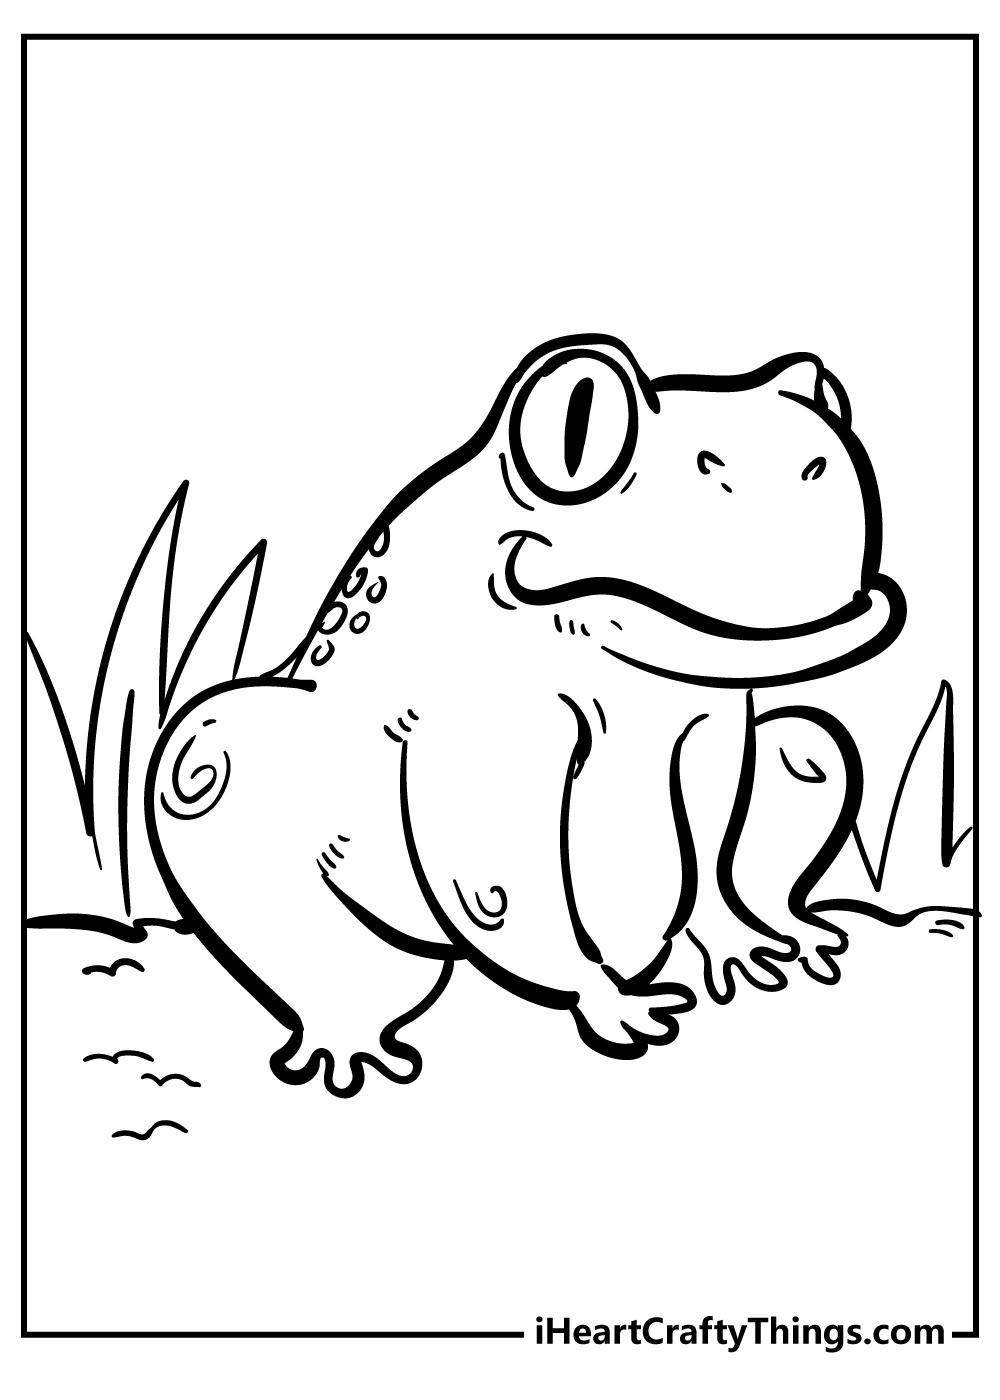 Frog coloring pages free printable